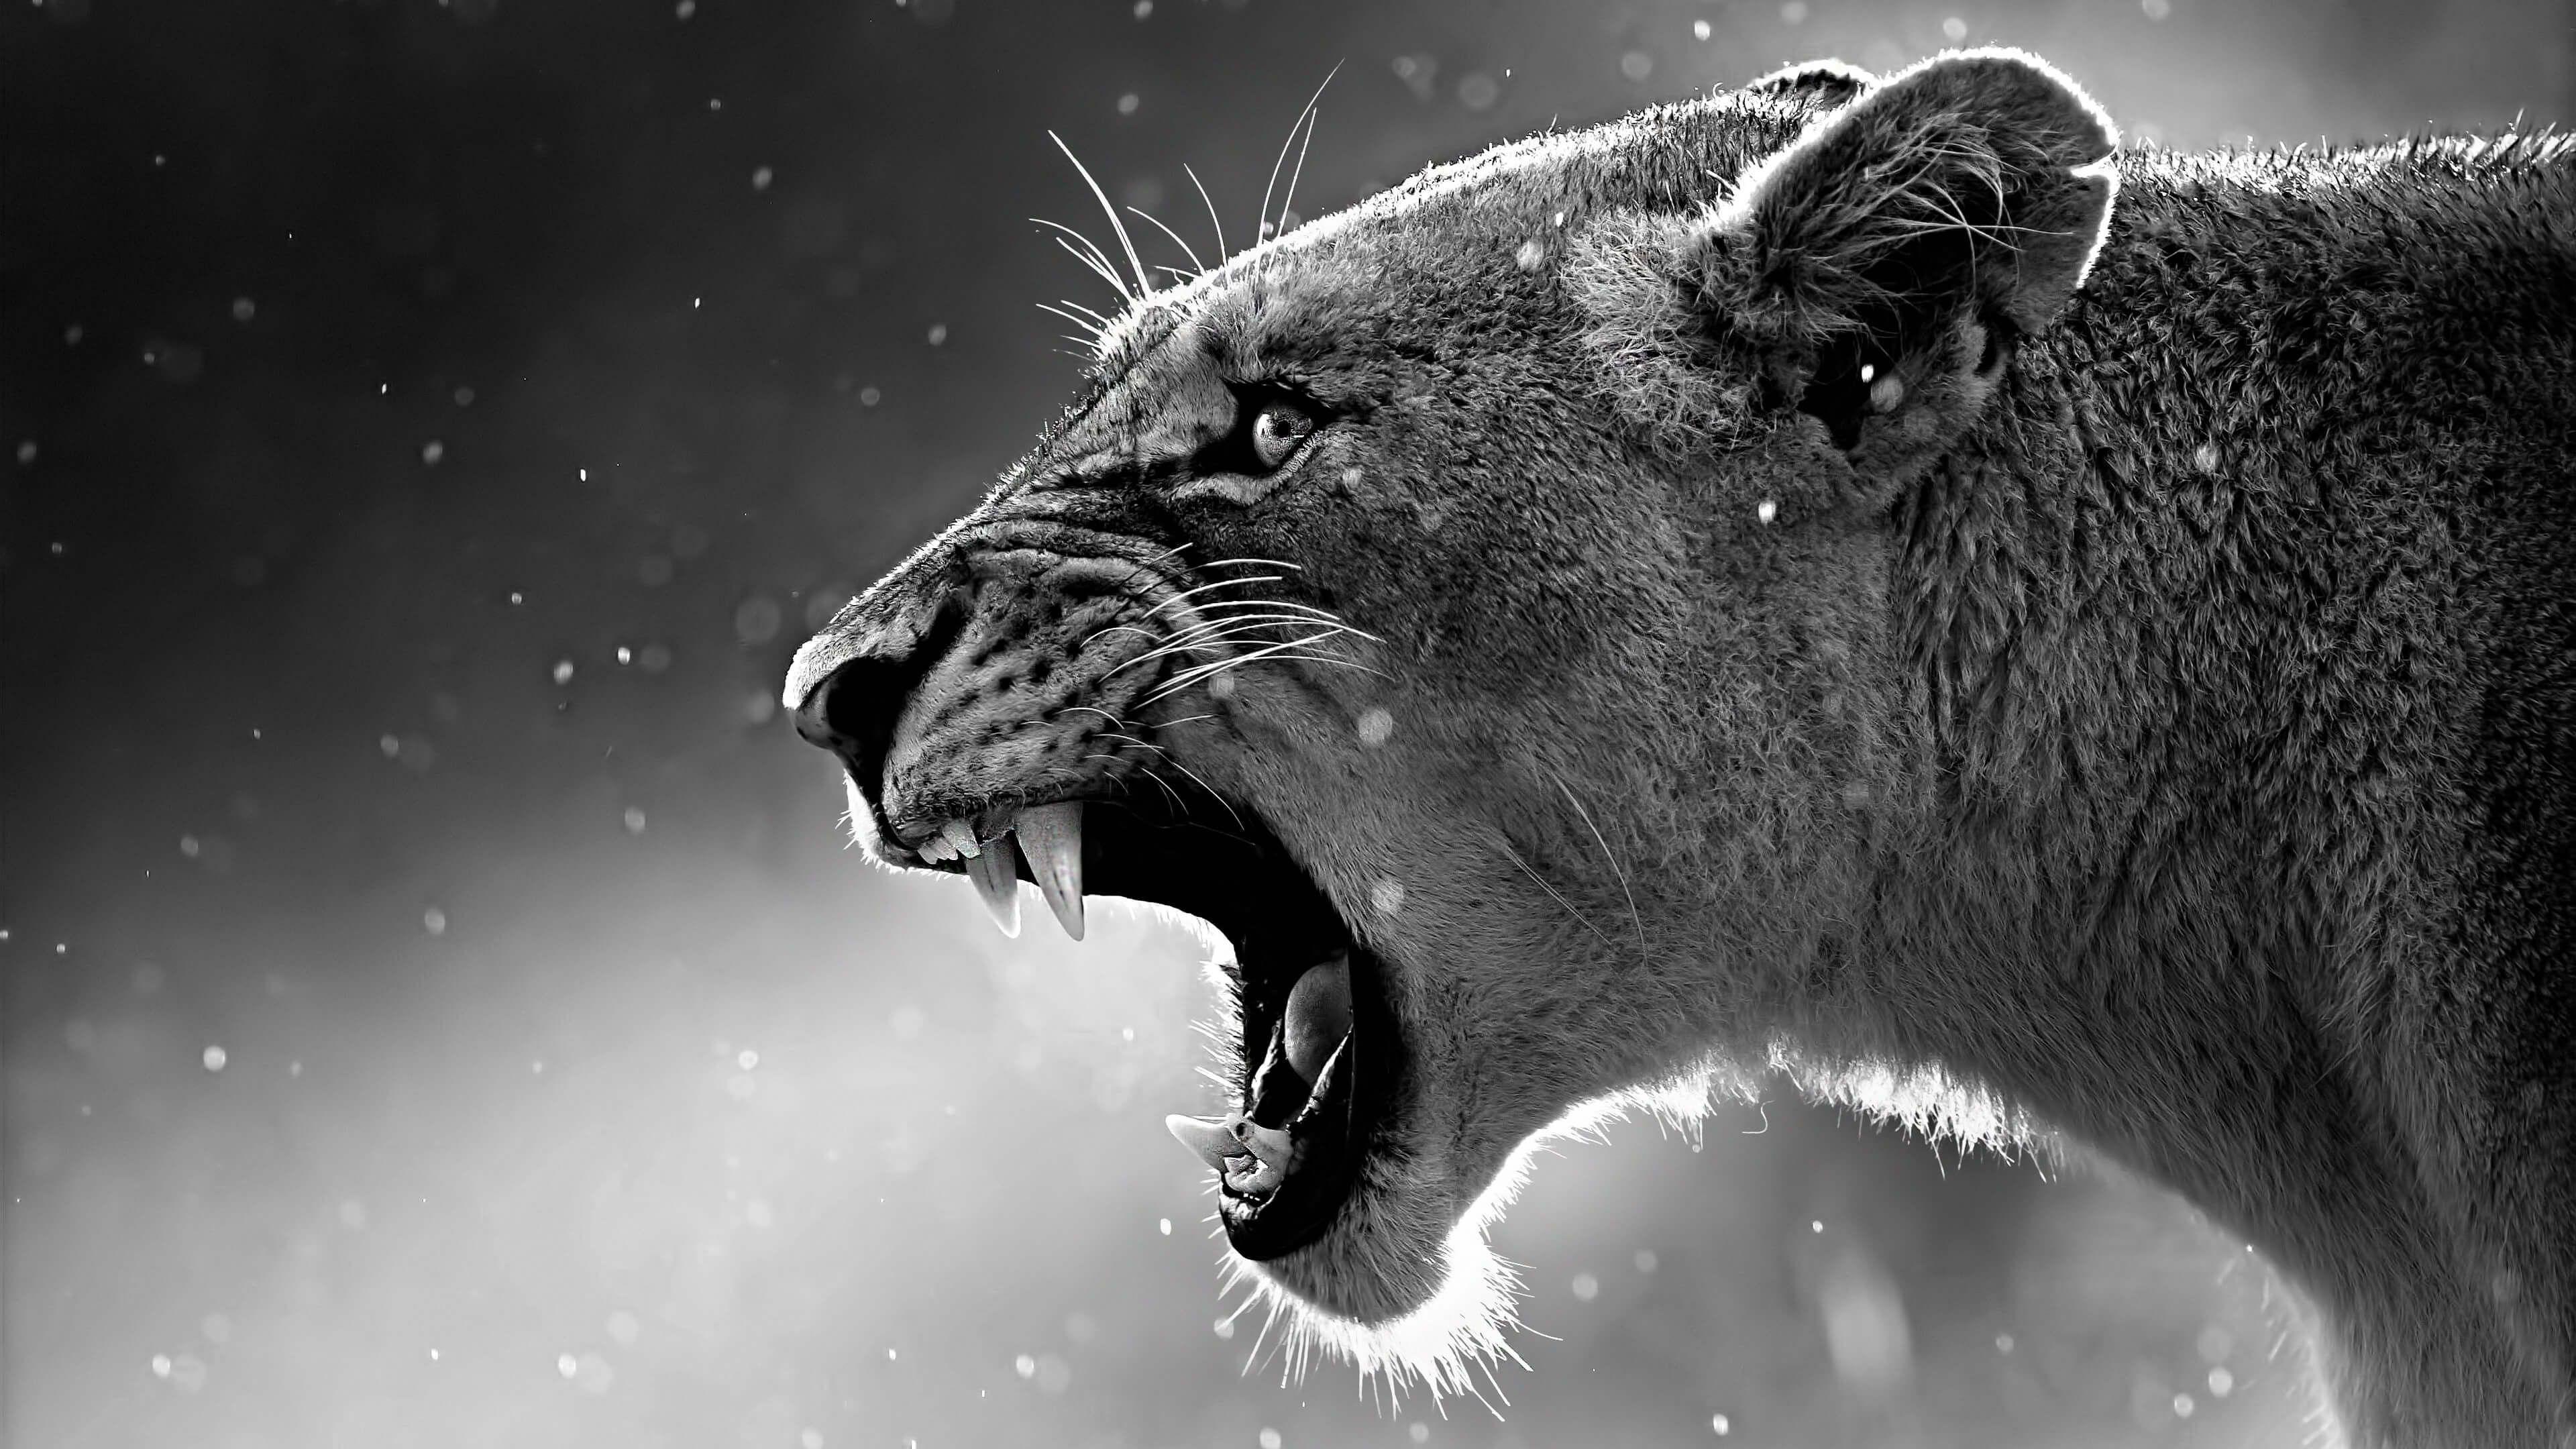 4K-resolution Black and White Logo - Download Lioness Howl Close-Up 4K Wallpaper from UHD Black and White ...